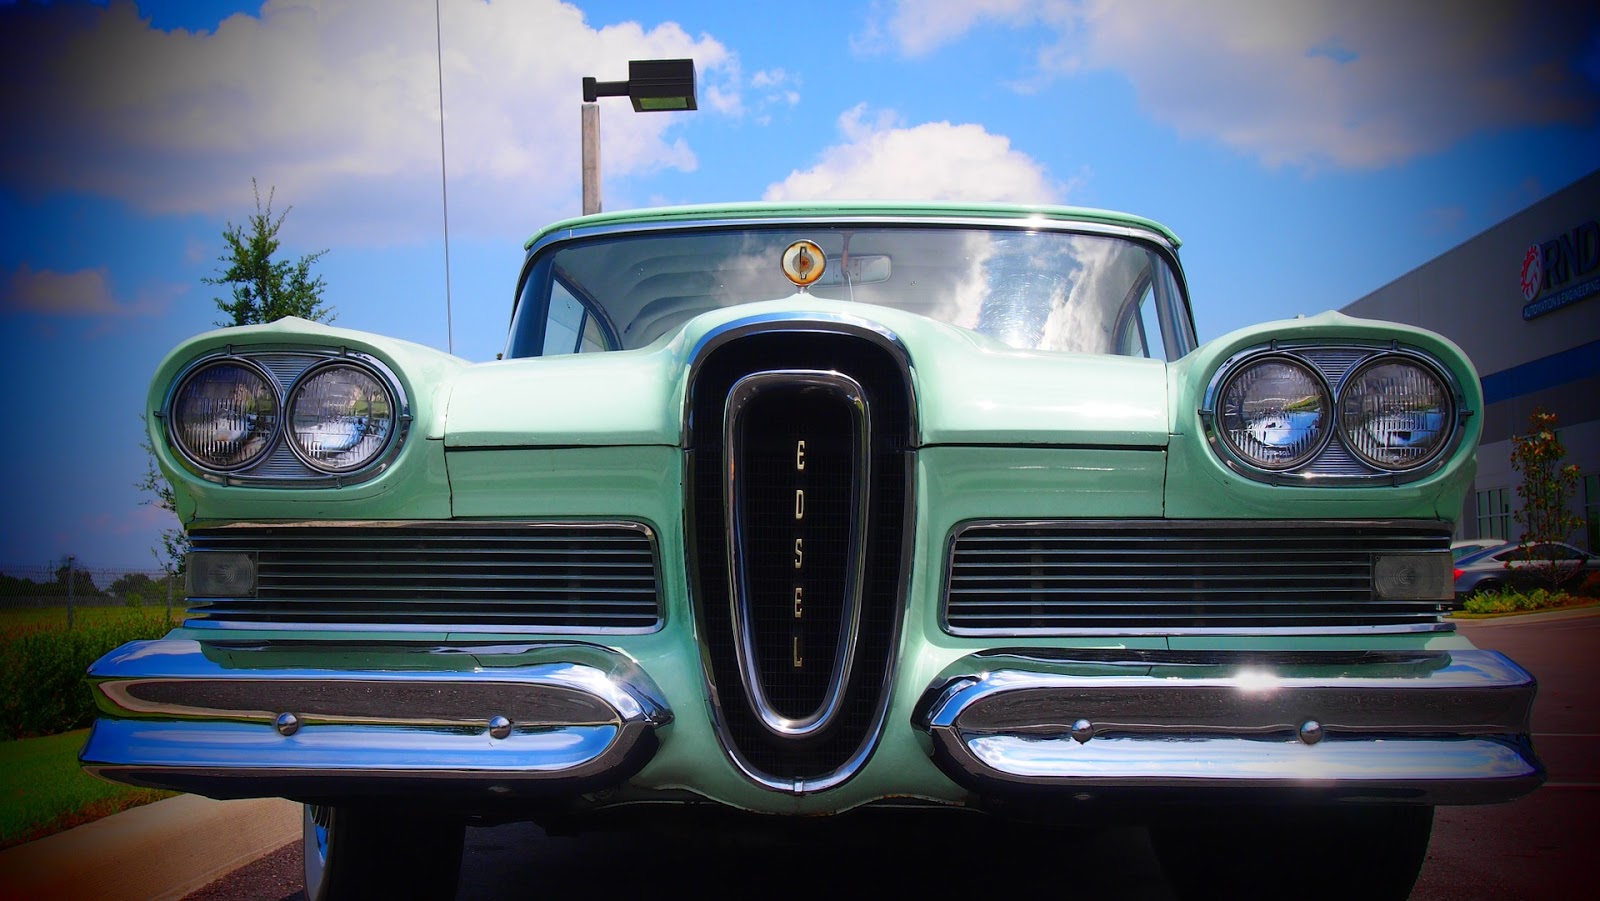 Famous product failures: Ford Edsel